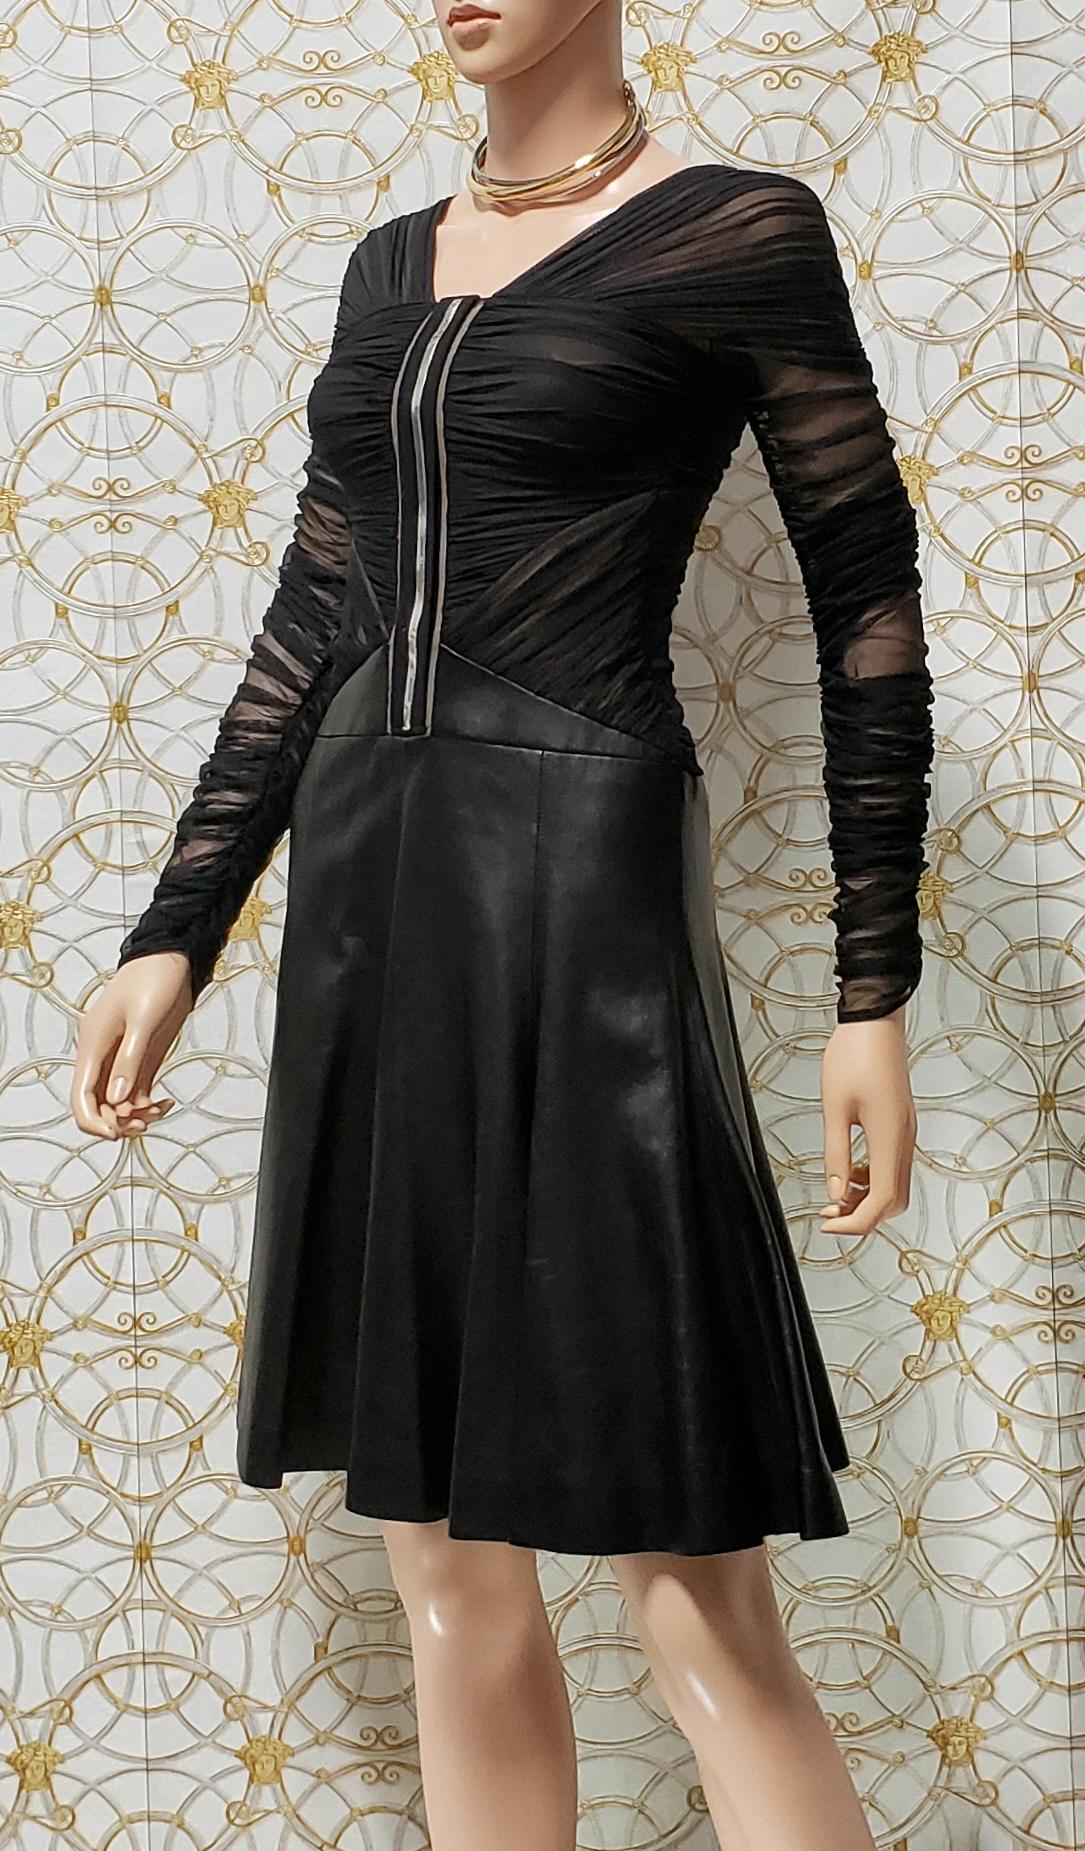 VERSACE


This dress has a tulle bodysuit and leather skirt

back zip 

Silver-tone Medusa hardware

Long sleeve


Content: 94% nylon, 6% elastane

lining: 96% rayon, 4% elastane 

lining 2: 100% silk

trim 1: 100% nylon

trim 2: 82% nylon, 18%